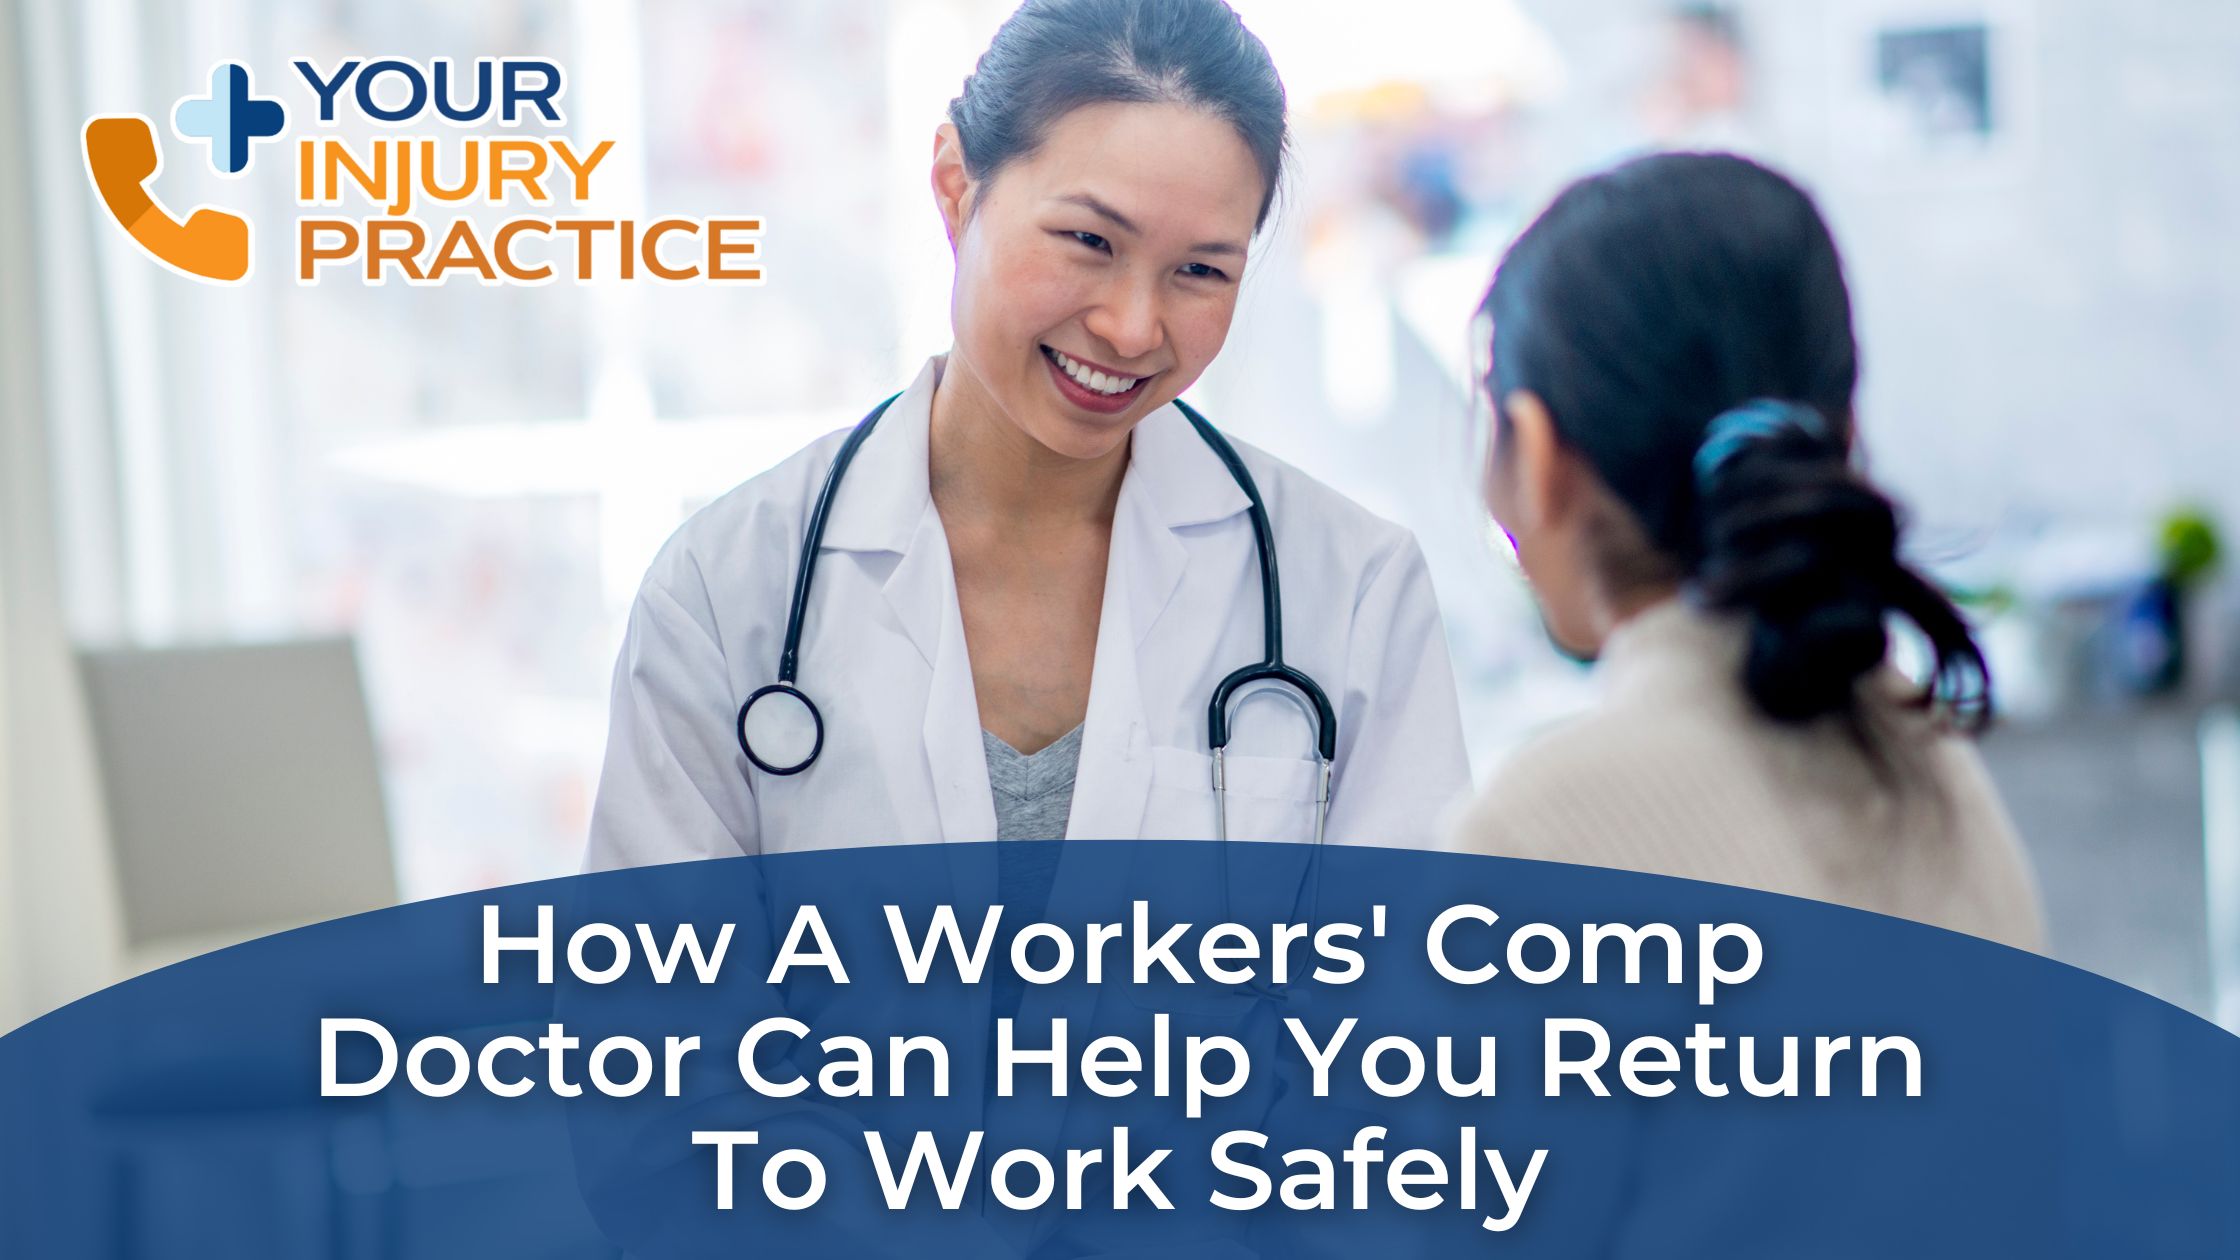 How a Workers' Comp Doctor Can Help You Return to Work Safely